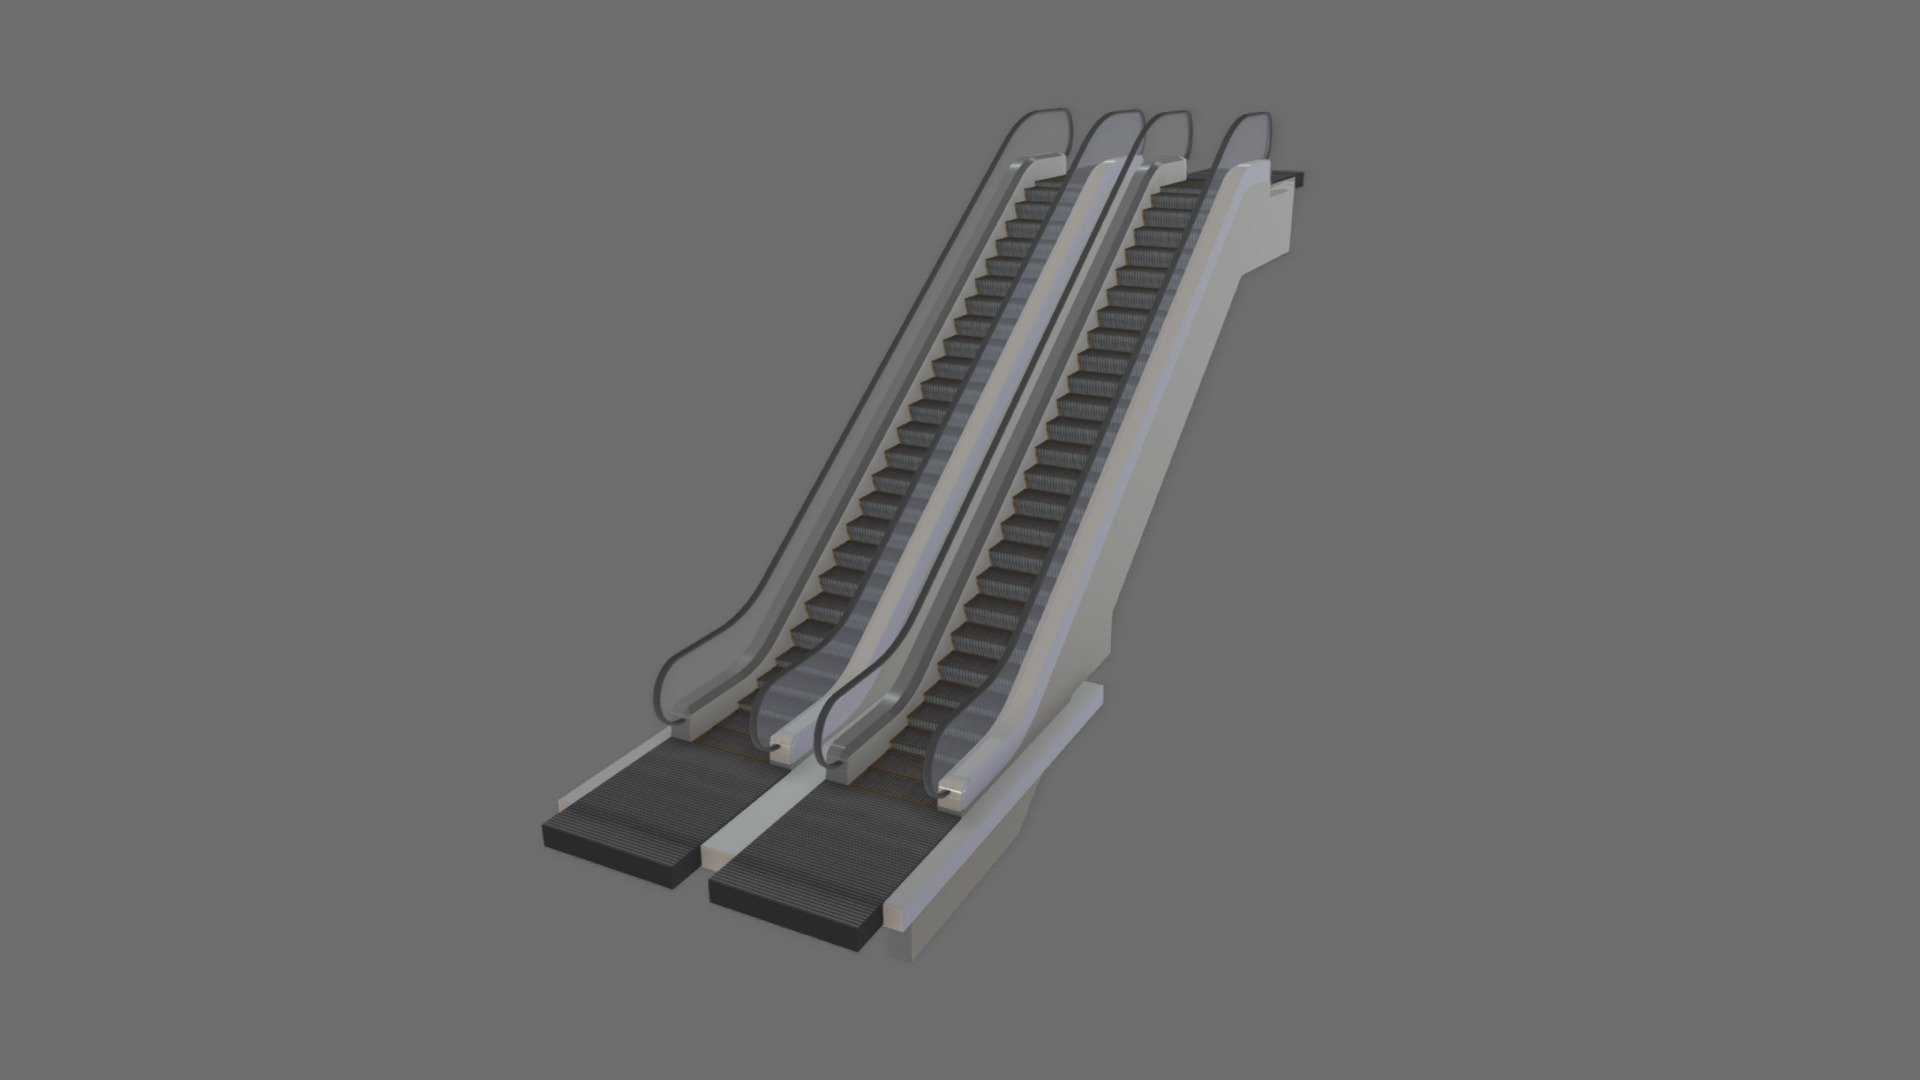 Animated Escalator model.

Poly: 13,745
Vertex: 8,474
in subdivision level 0

3ds max,FBX and texture files in additional file 3d model